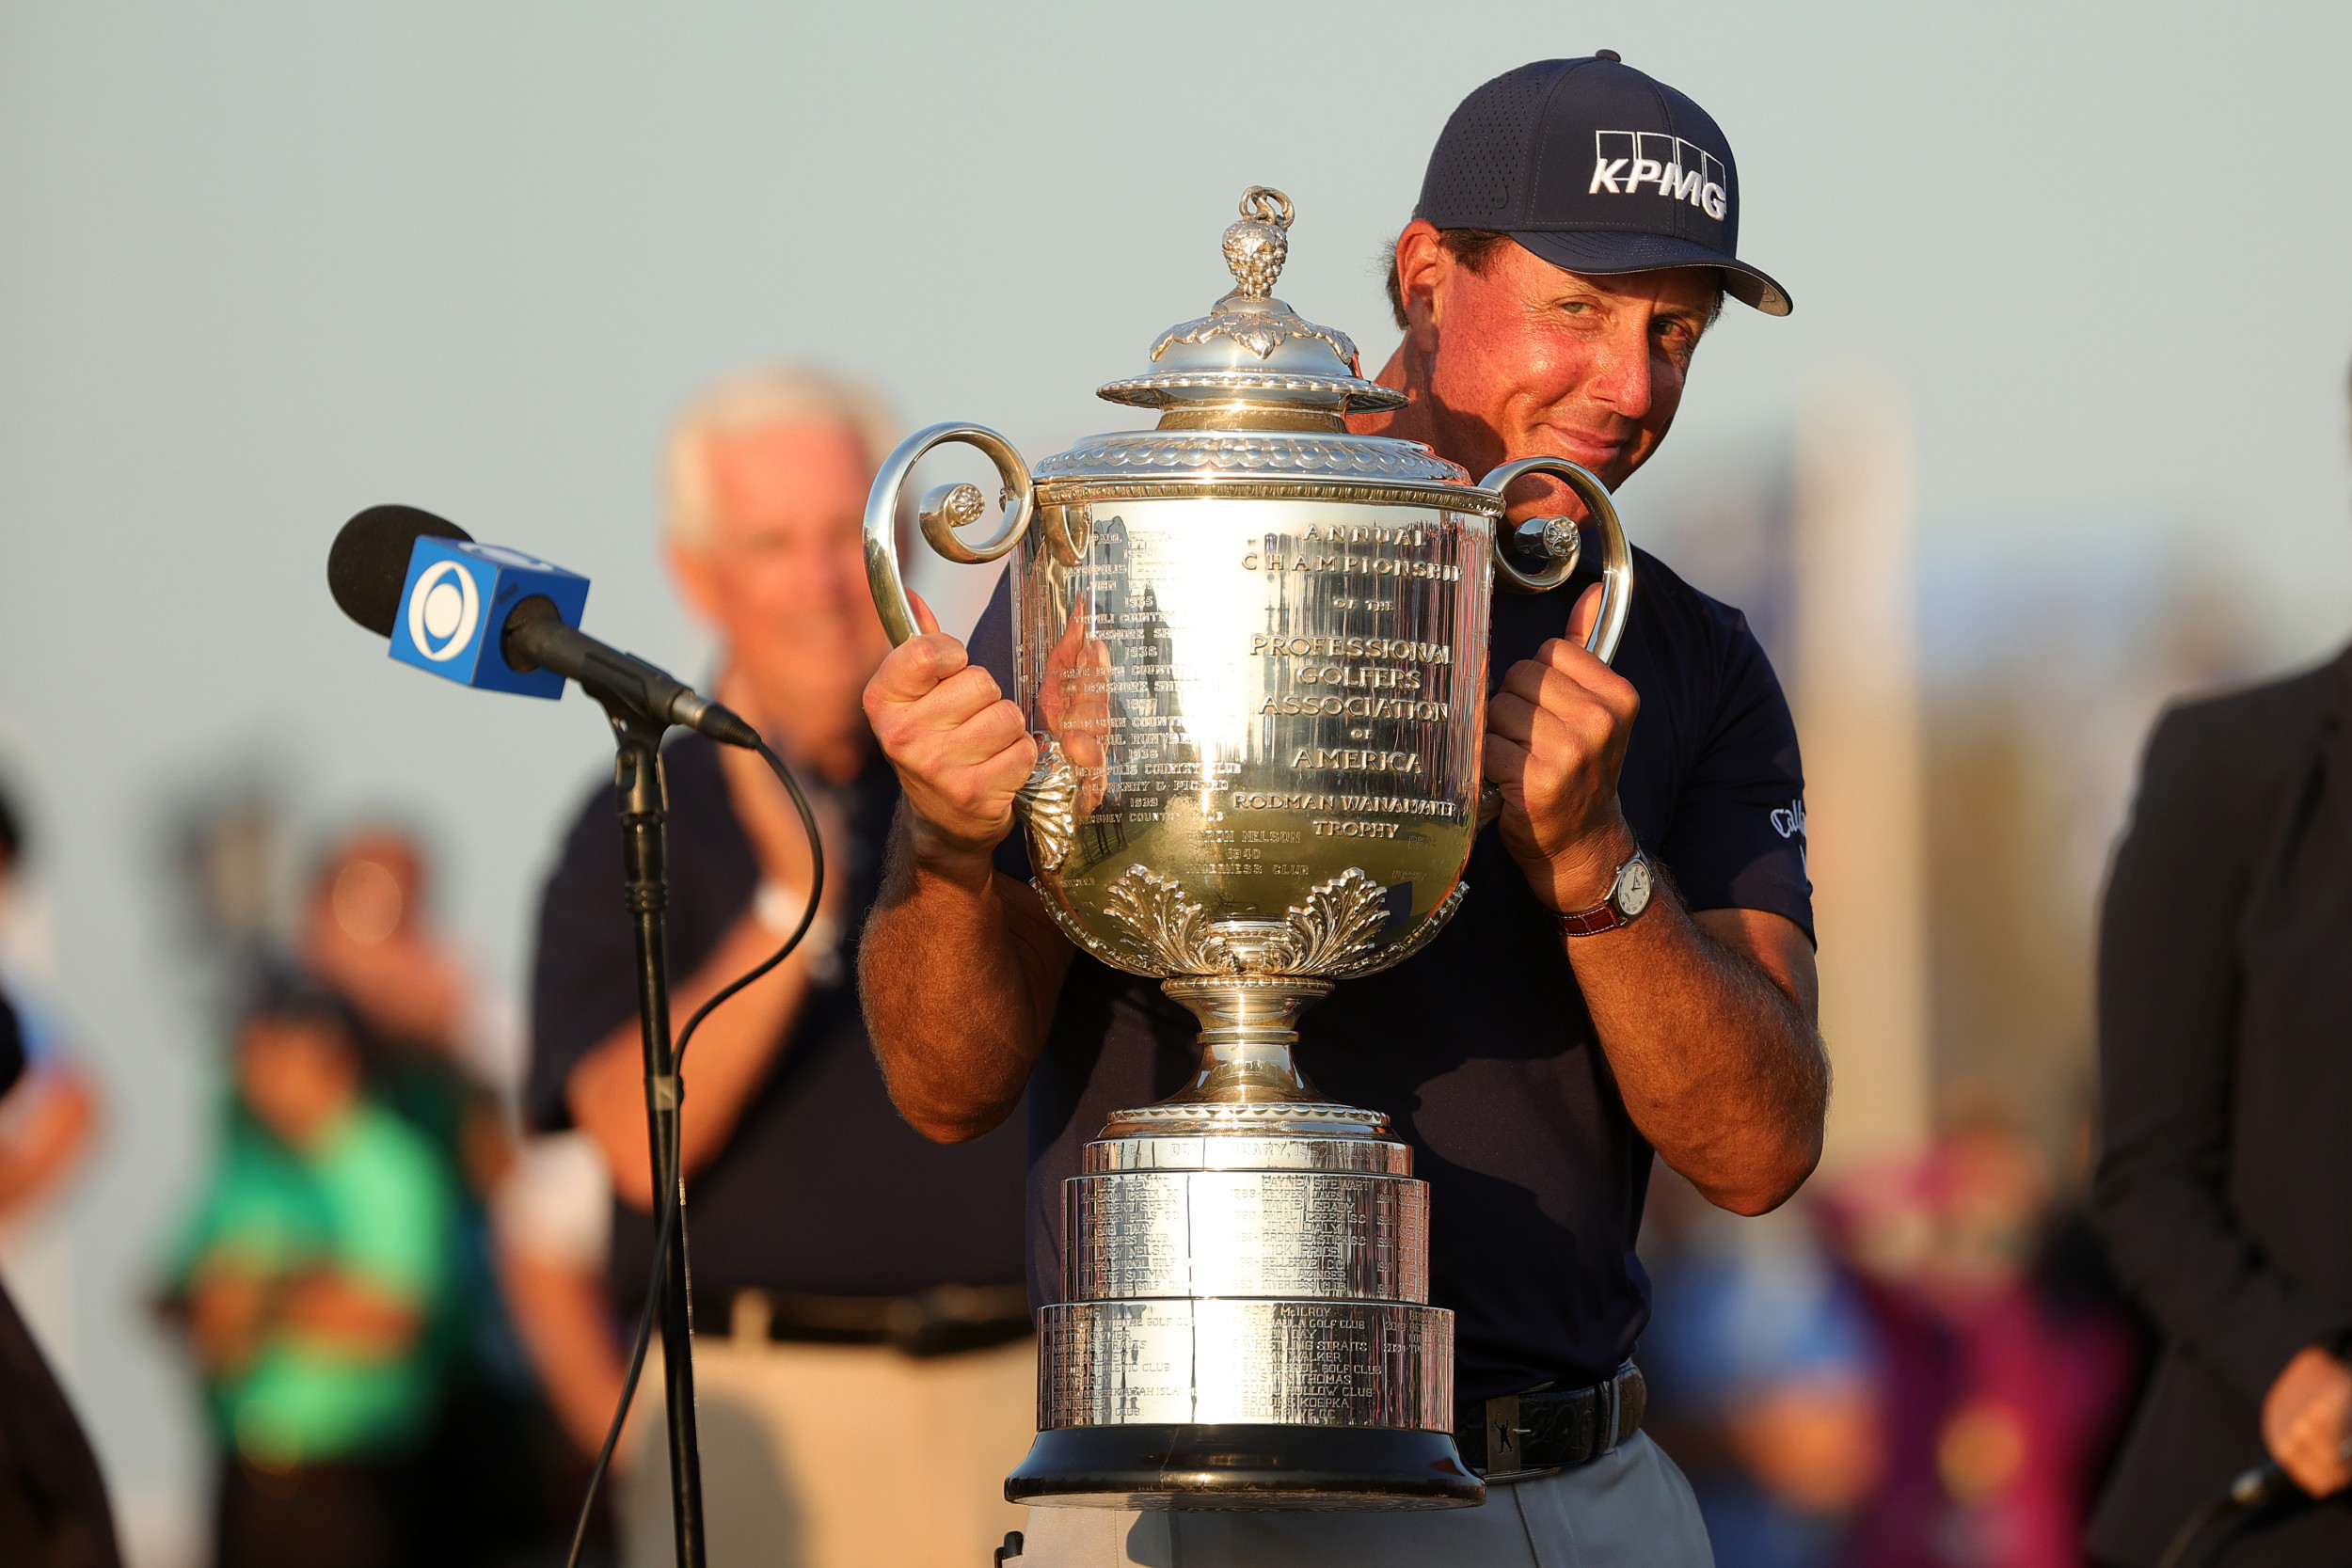 2022 Honda Classic: What is the prize purse and winner's share? | GolfMagic